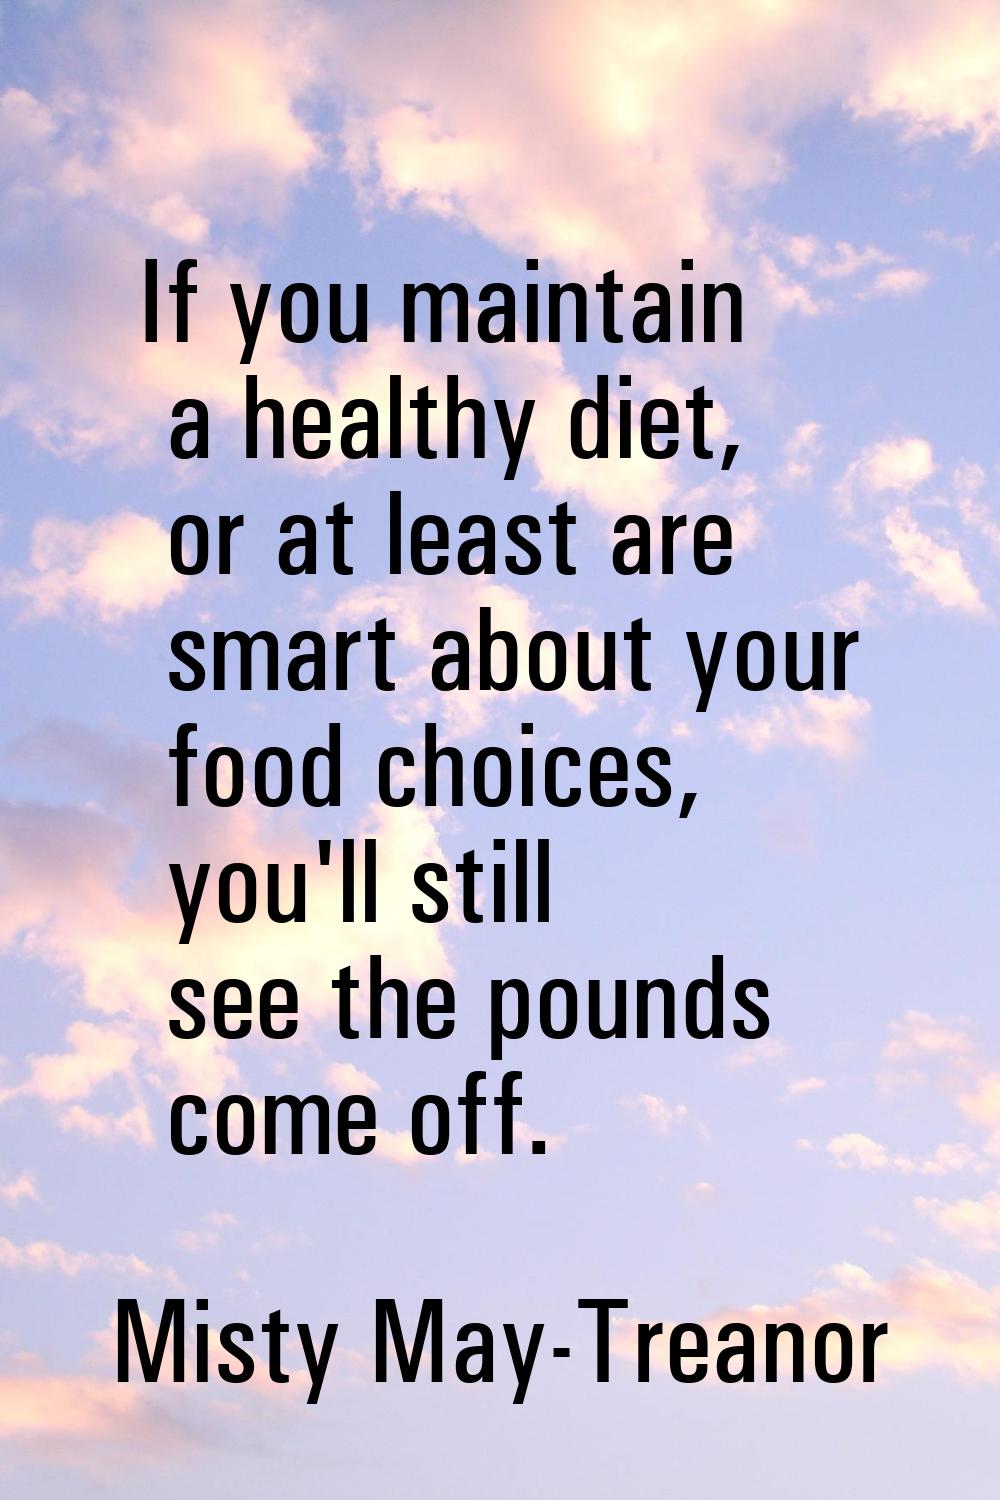 If you maintain a healthy diet, or at least are smart about your food choices, you'll still see the